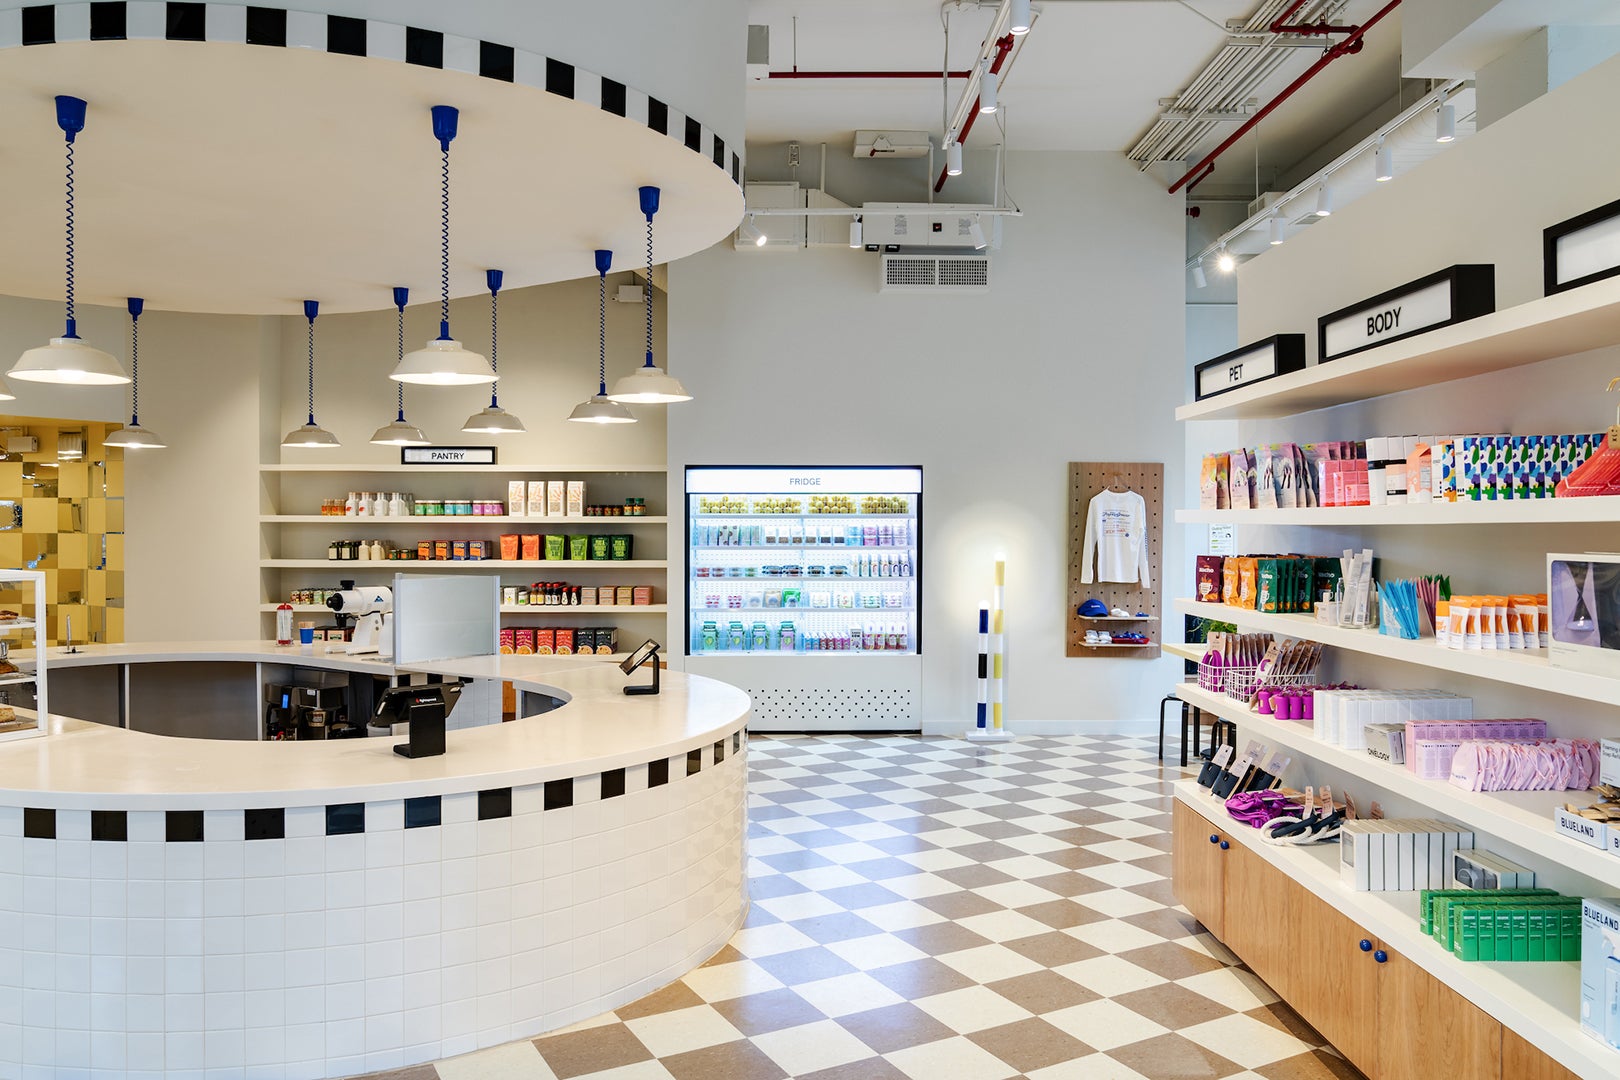 Pop Up Grocer’s New Shop Confirms That This Retro Flooring Material Is Cool Again